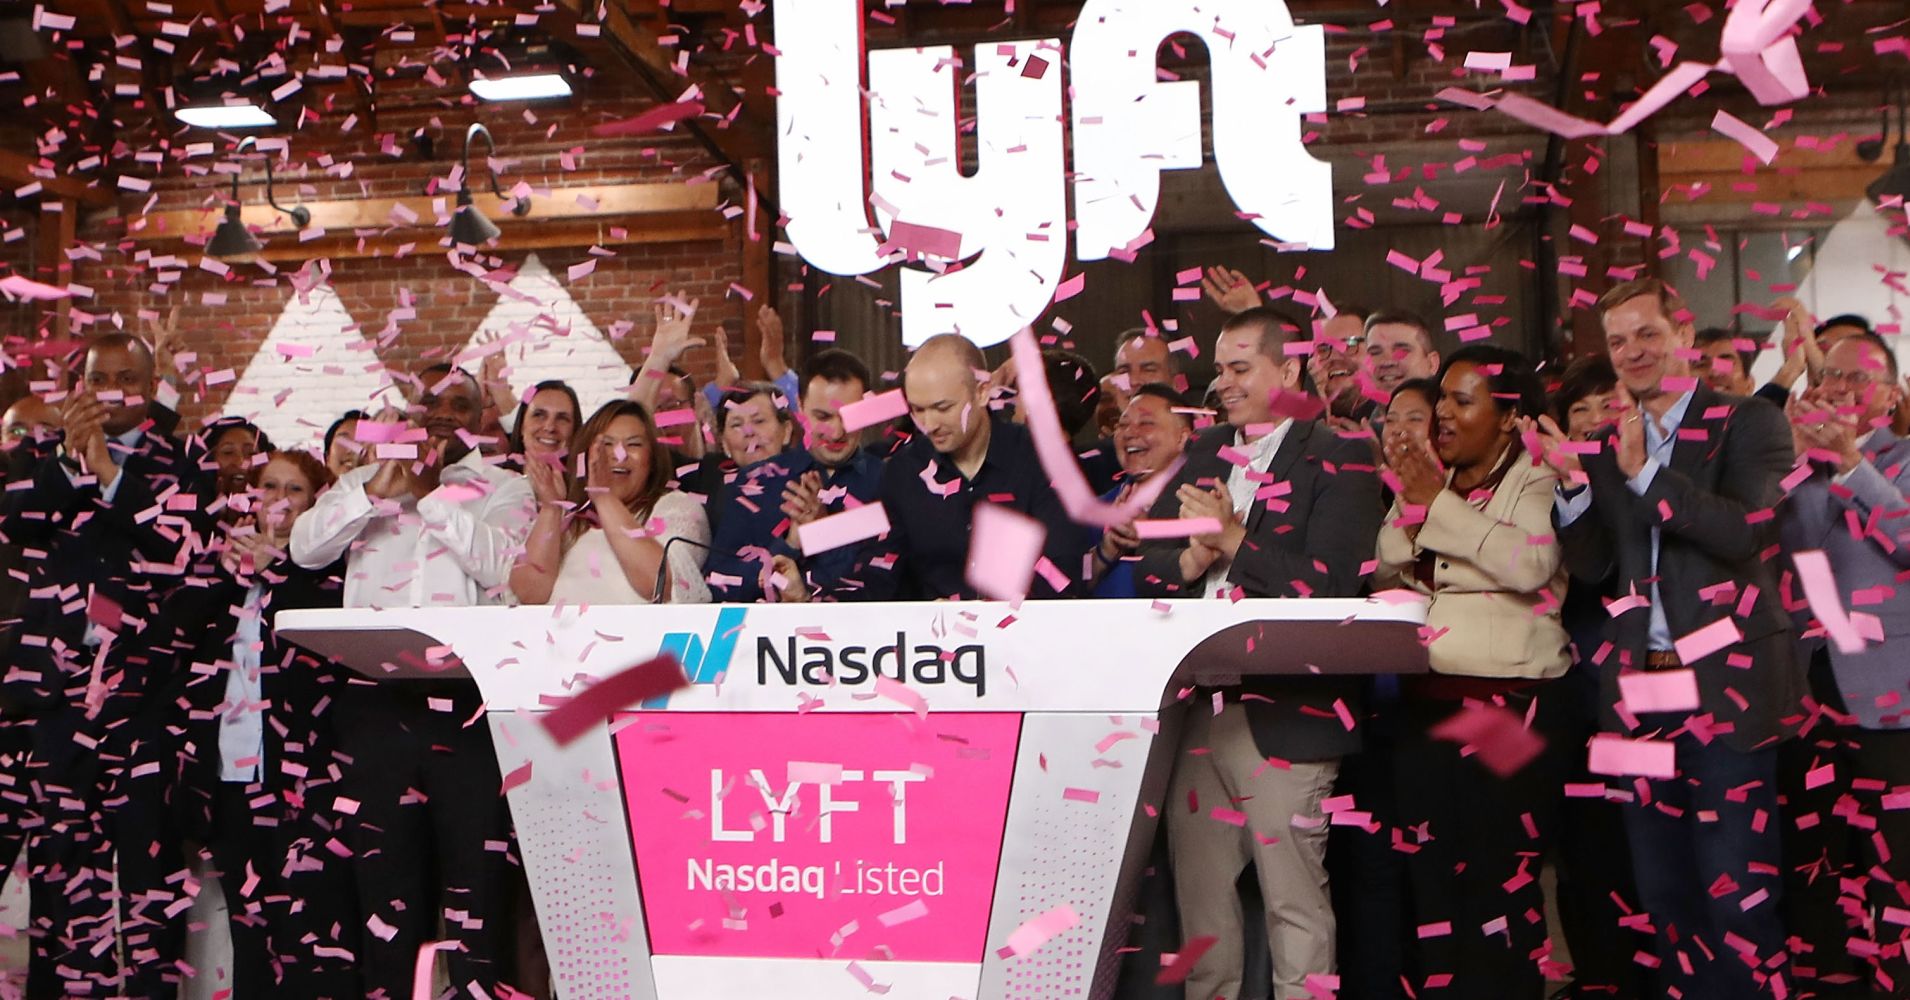 Confetti falls as Lyft CEO Logan Green (C) rings the Nasdaq opening bell celebrating the company's initial public offering (IPO) on March 29, 2019 in Los Angeles, California.